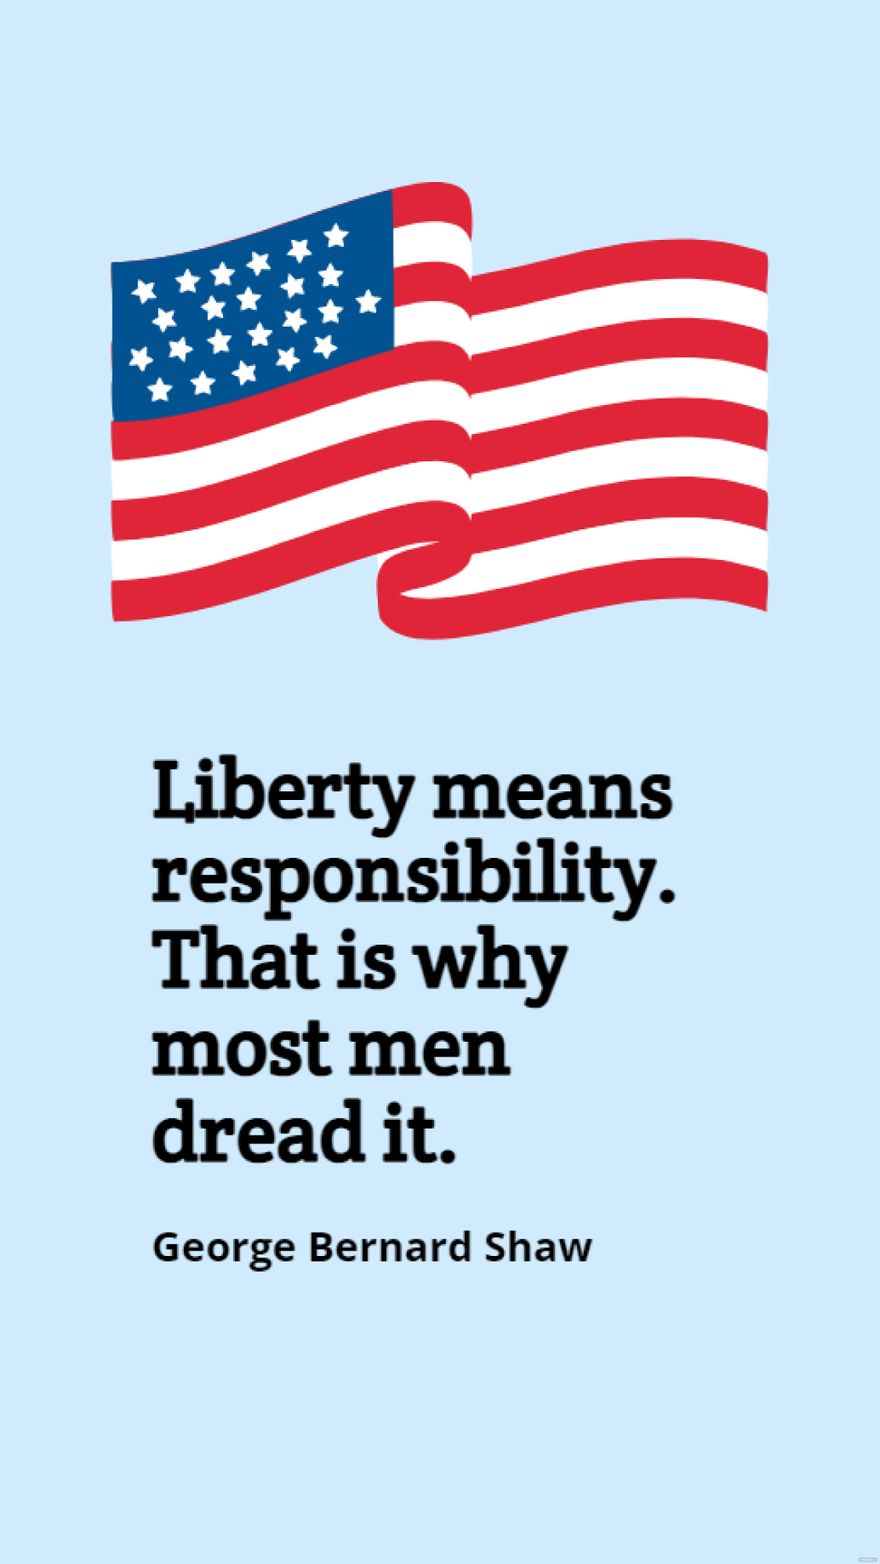 Liberty means responsibility. That is why most men dread it.” -George  Bernard Shaw #rjuhasta #4thofjuly #4th #4thjuly🇺🇸 #4thjuly